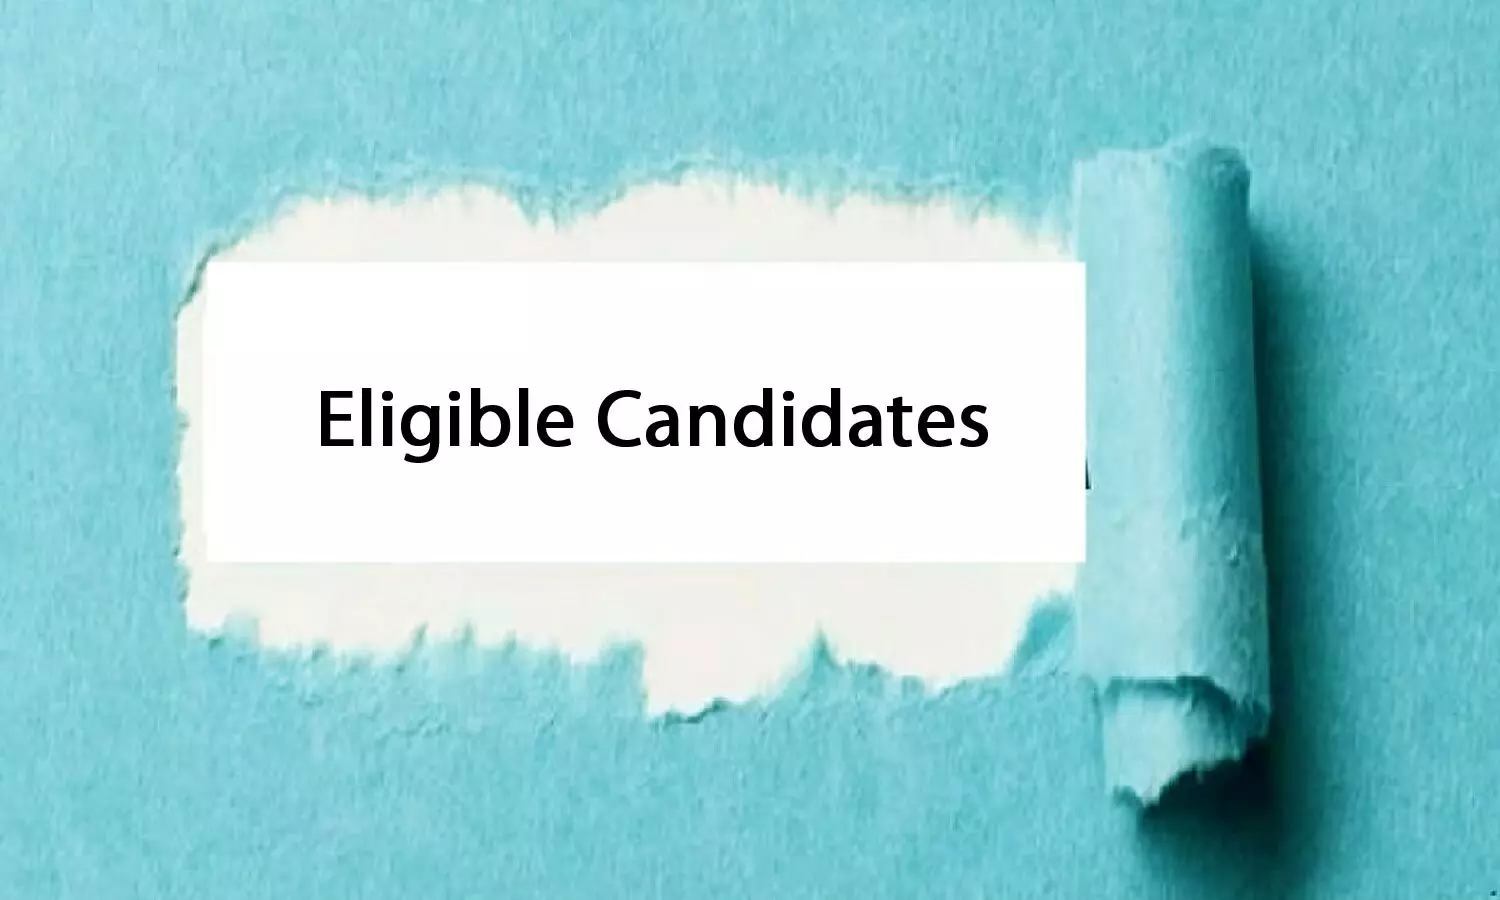 AIIMS releases list of Eligible Candidates for MD, MS, MDS, Fellowship Professional Exams June 2020